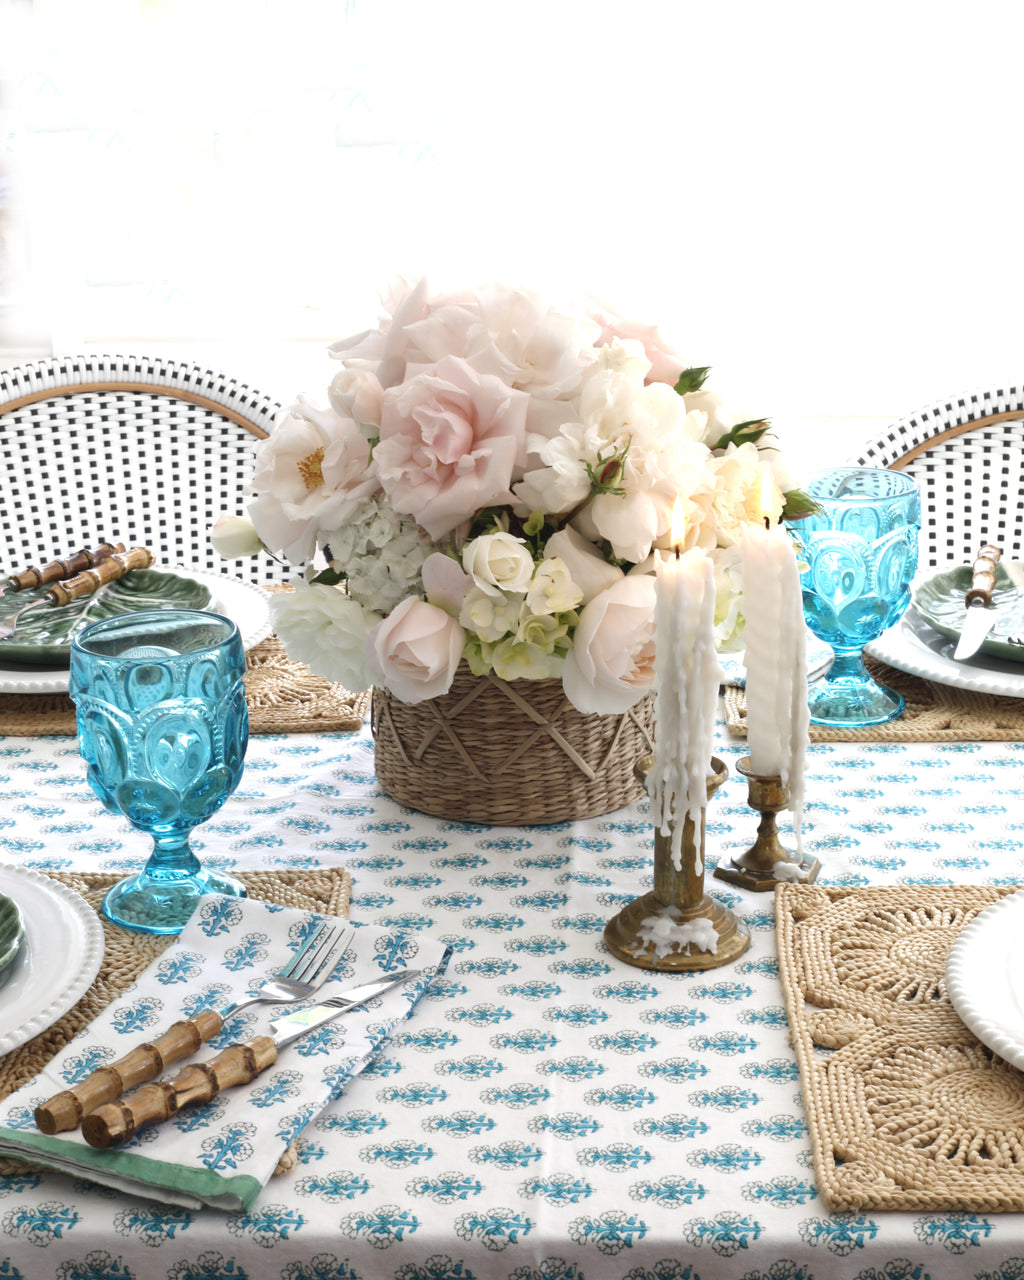 Talelayo Tablecloth in  Blue and Green